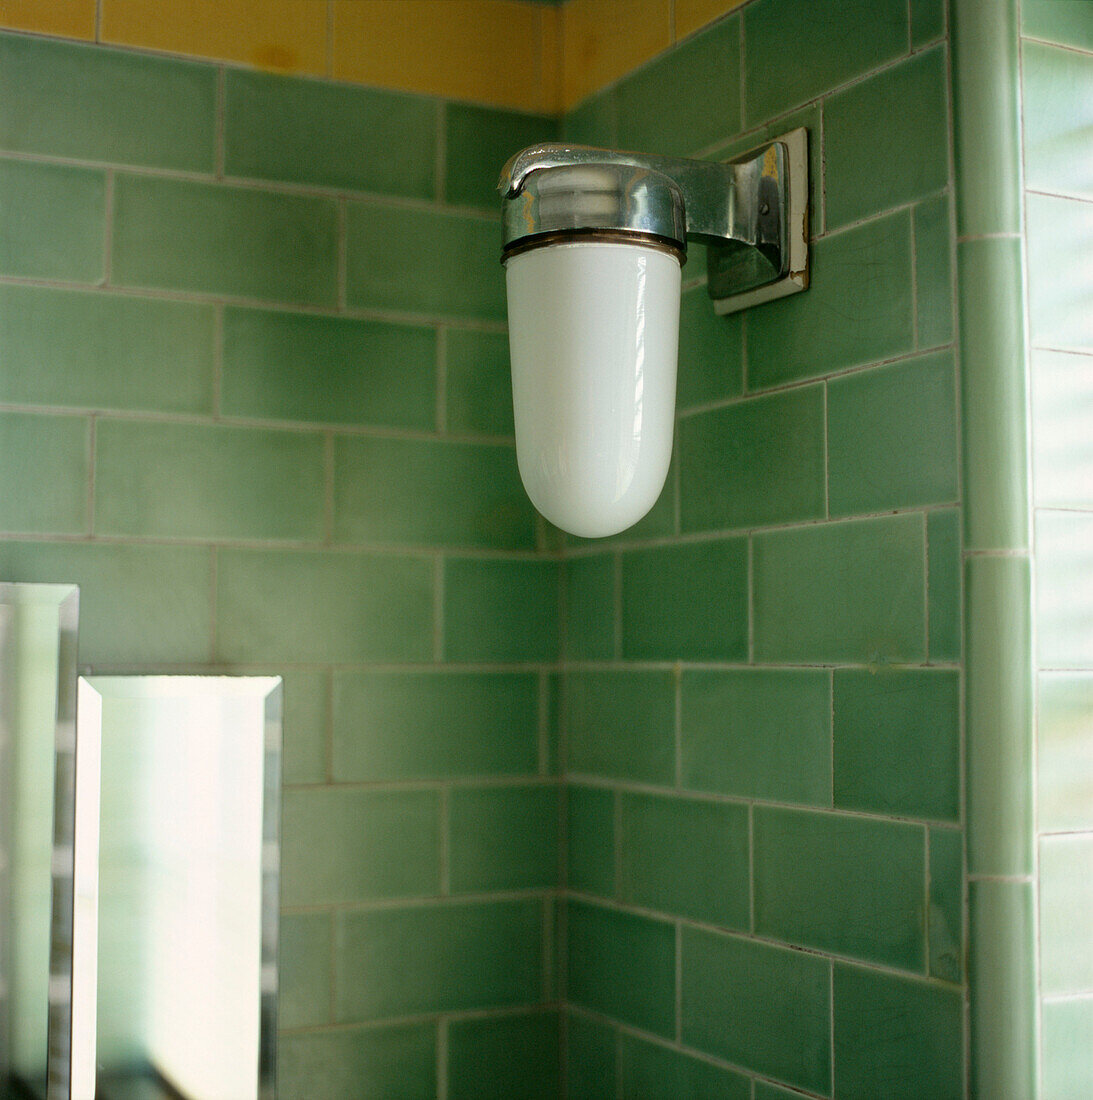 Detail of Art deco wall light and green bathroom tiles